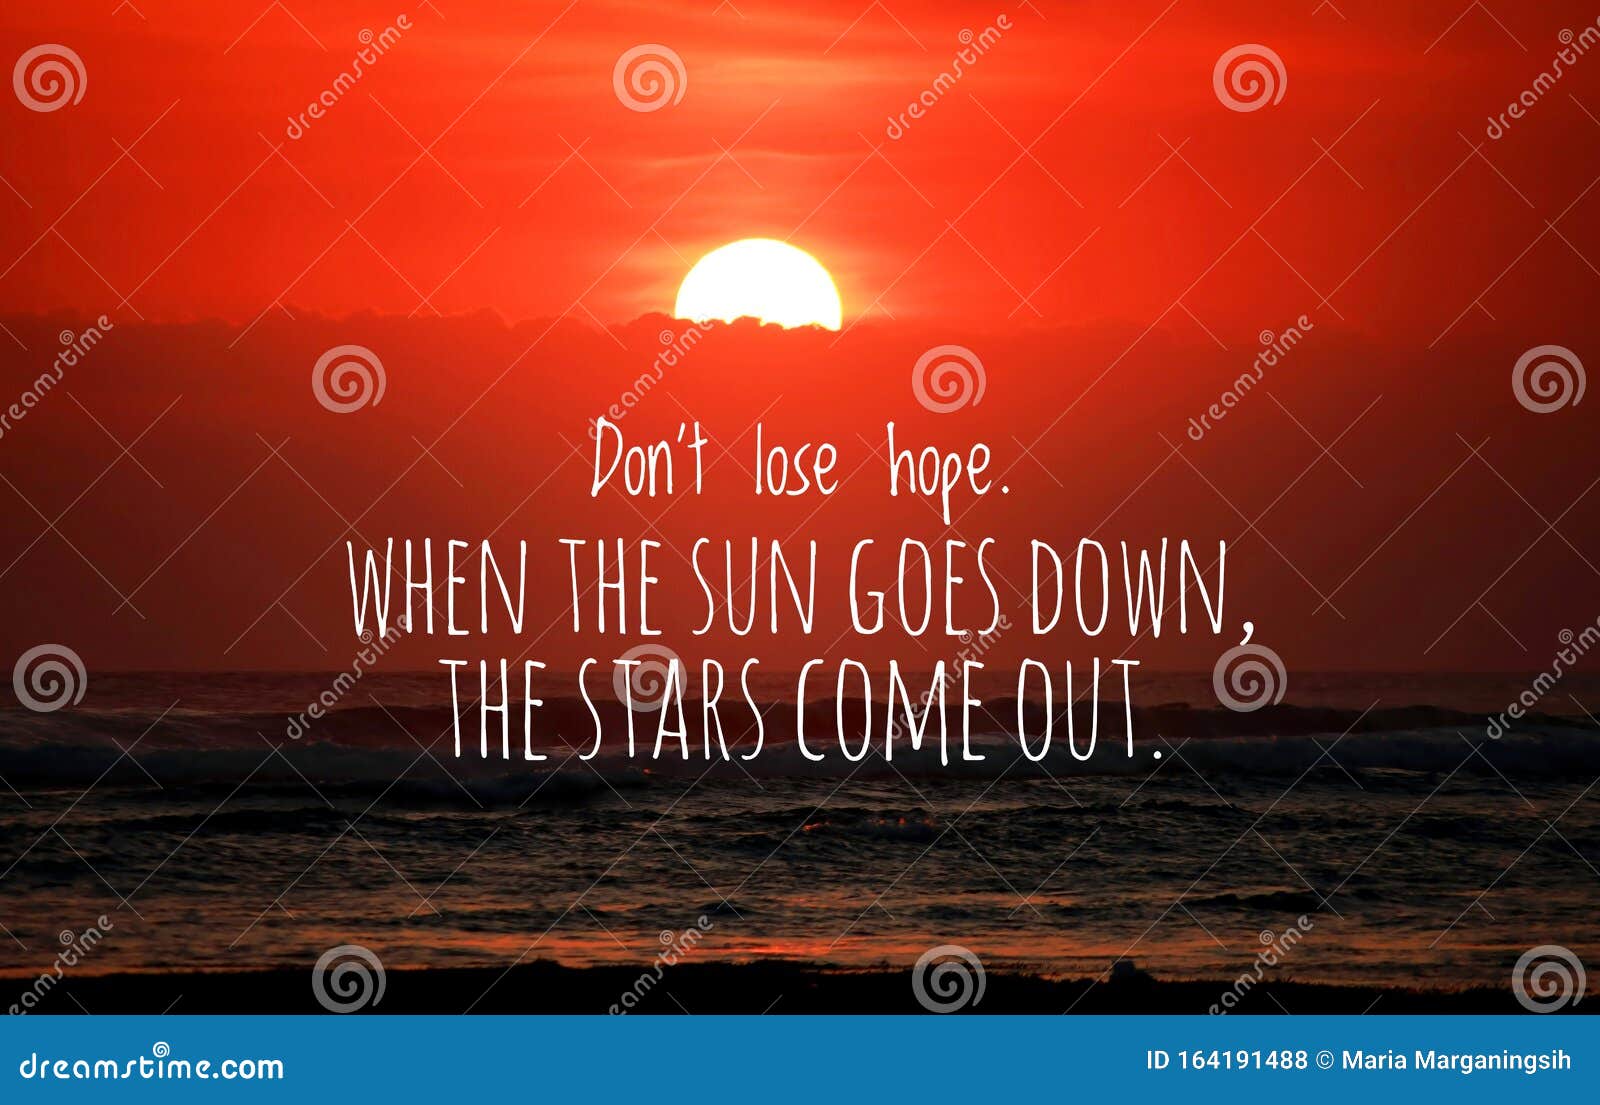 Inspirational Quote - Do Not Lose  the Sun Goes Down, the Stars  Come Out. with Blurry Sunset Background Over the Sea. Stock Photo - Image  of ocean, landscape: 164191488